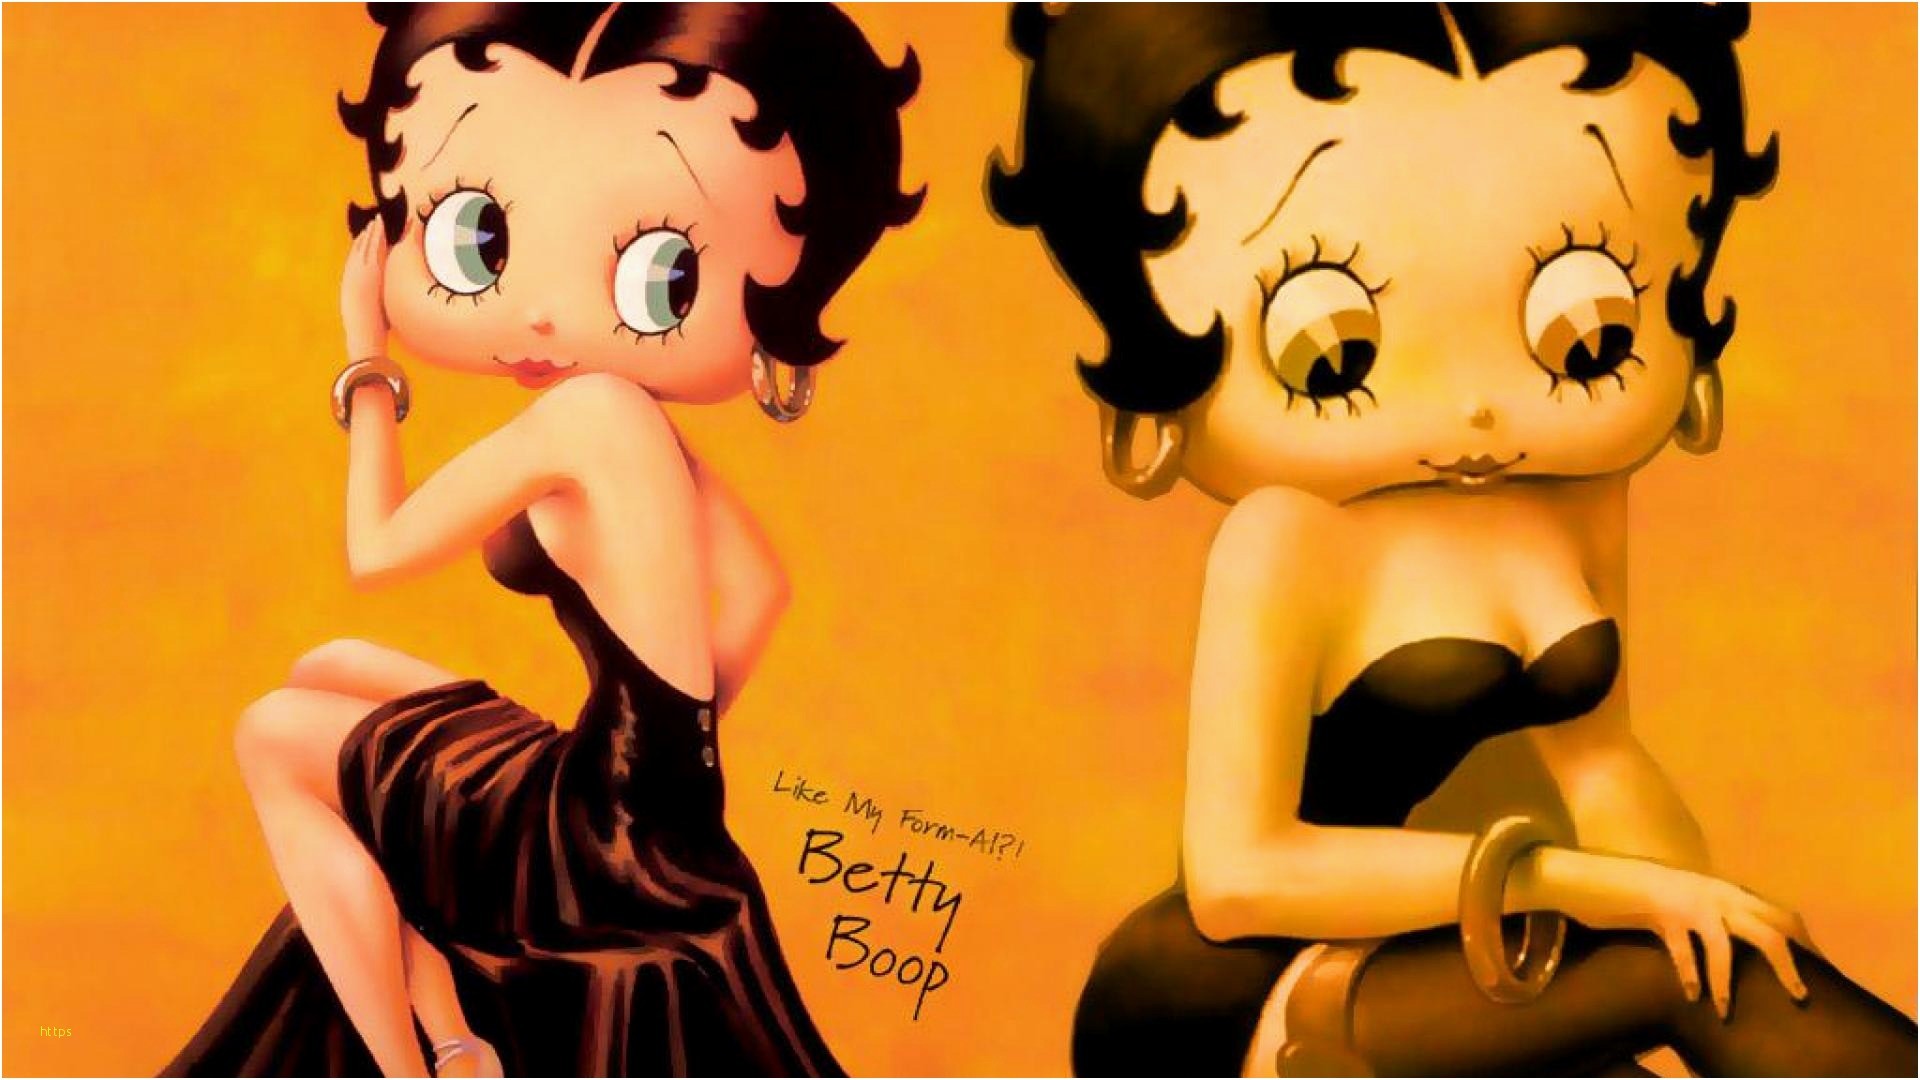 1920x1080 Betty Boop Wallpaper Awesome Betty Boop Live Wallpaper .